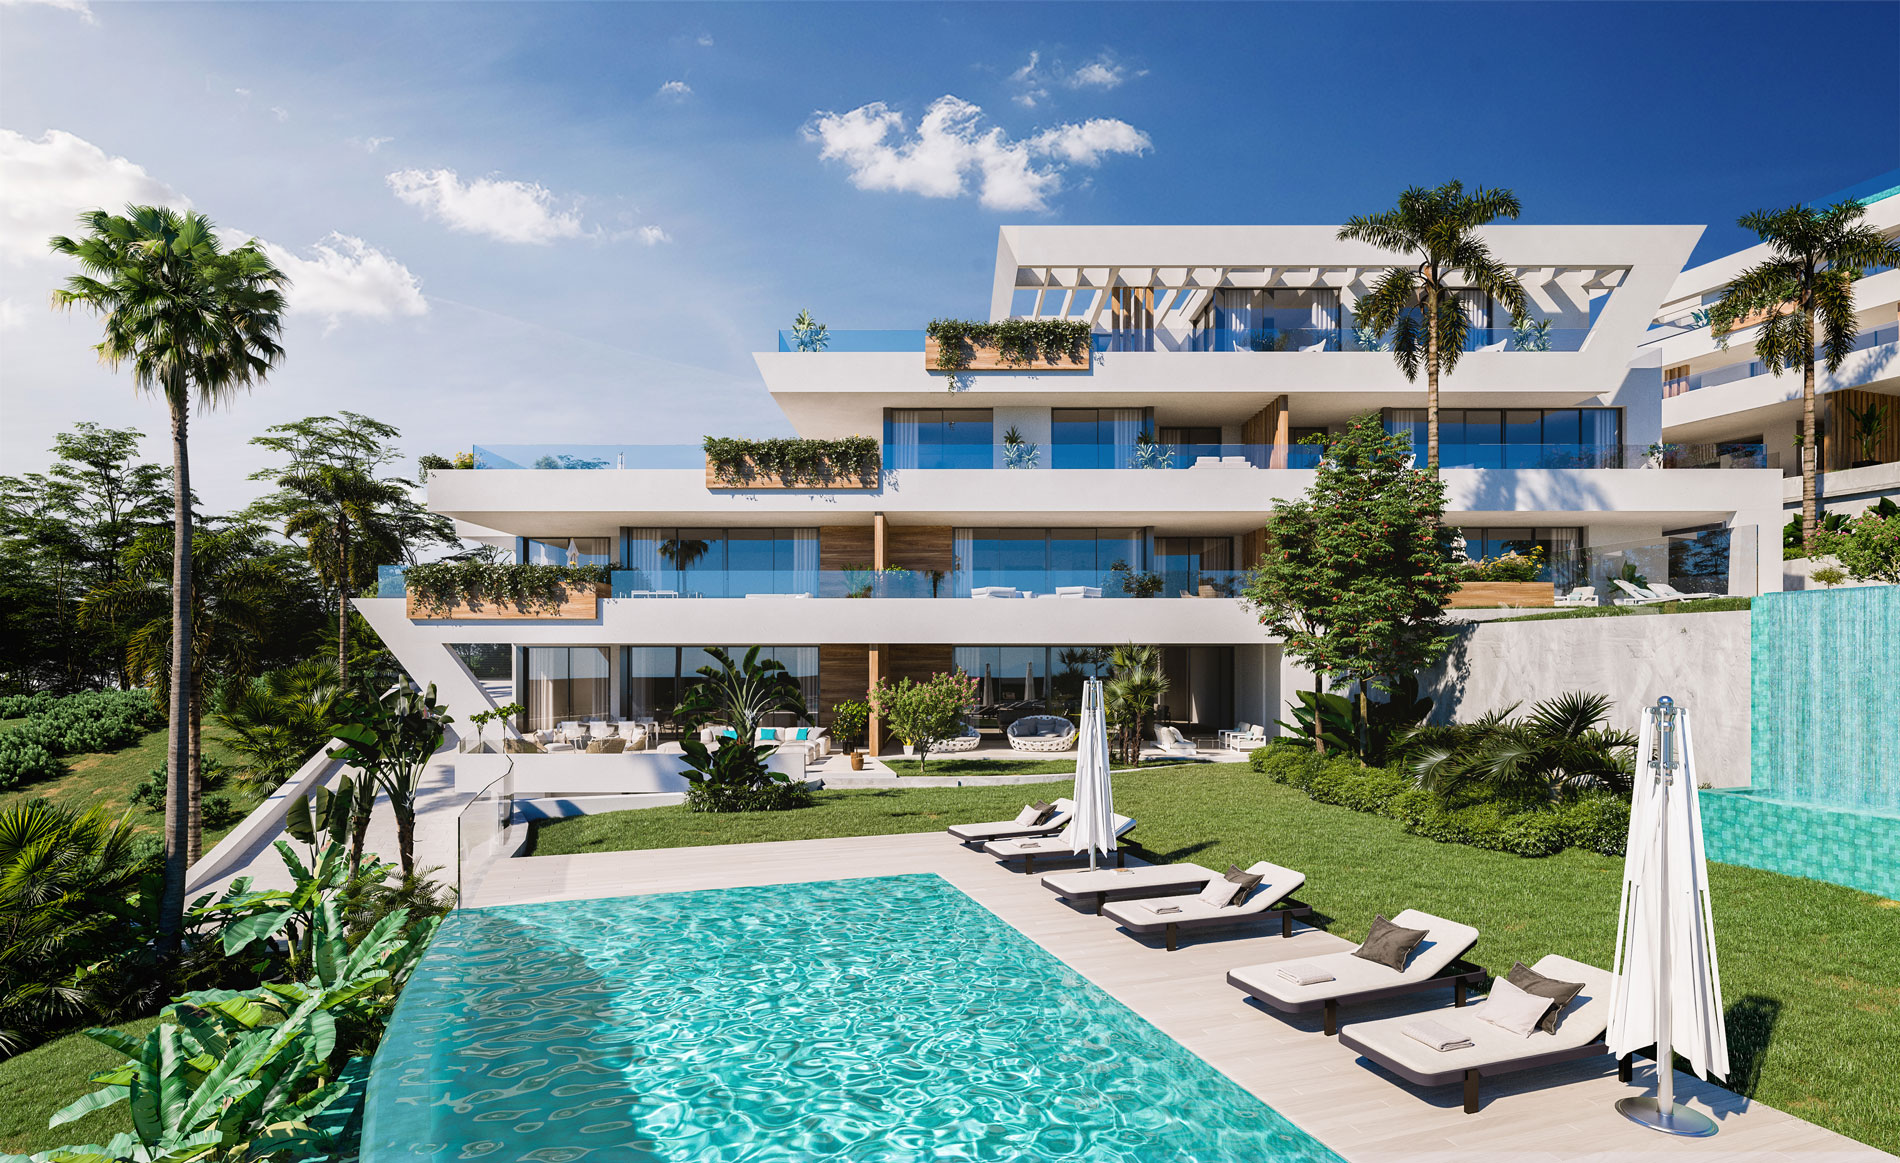 New sea view apartments & penthouses - Cabopino real state